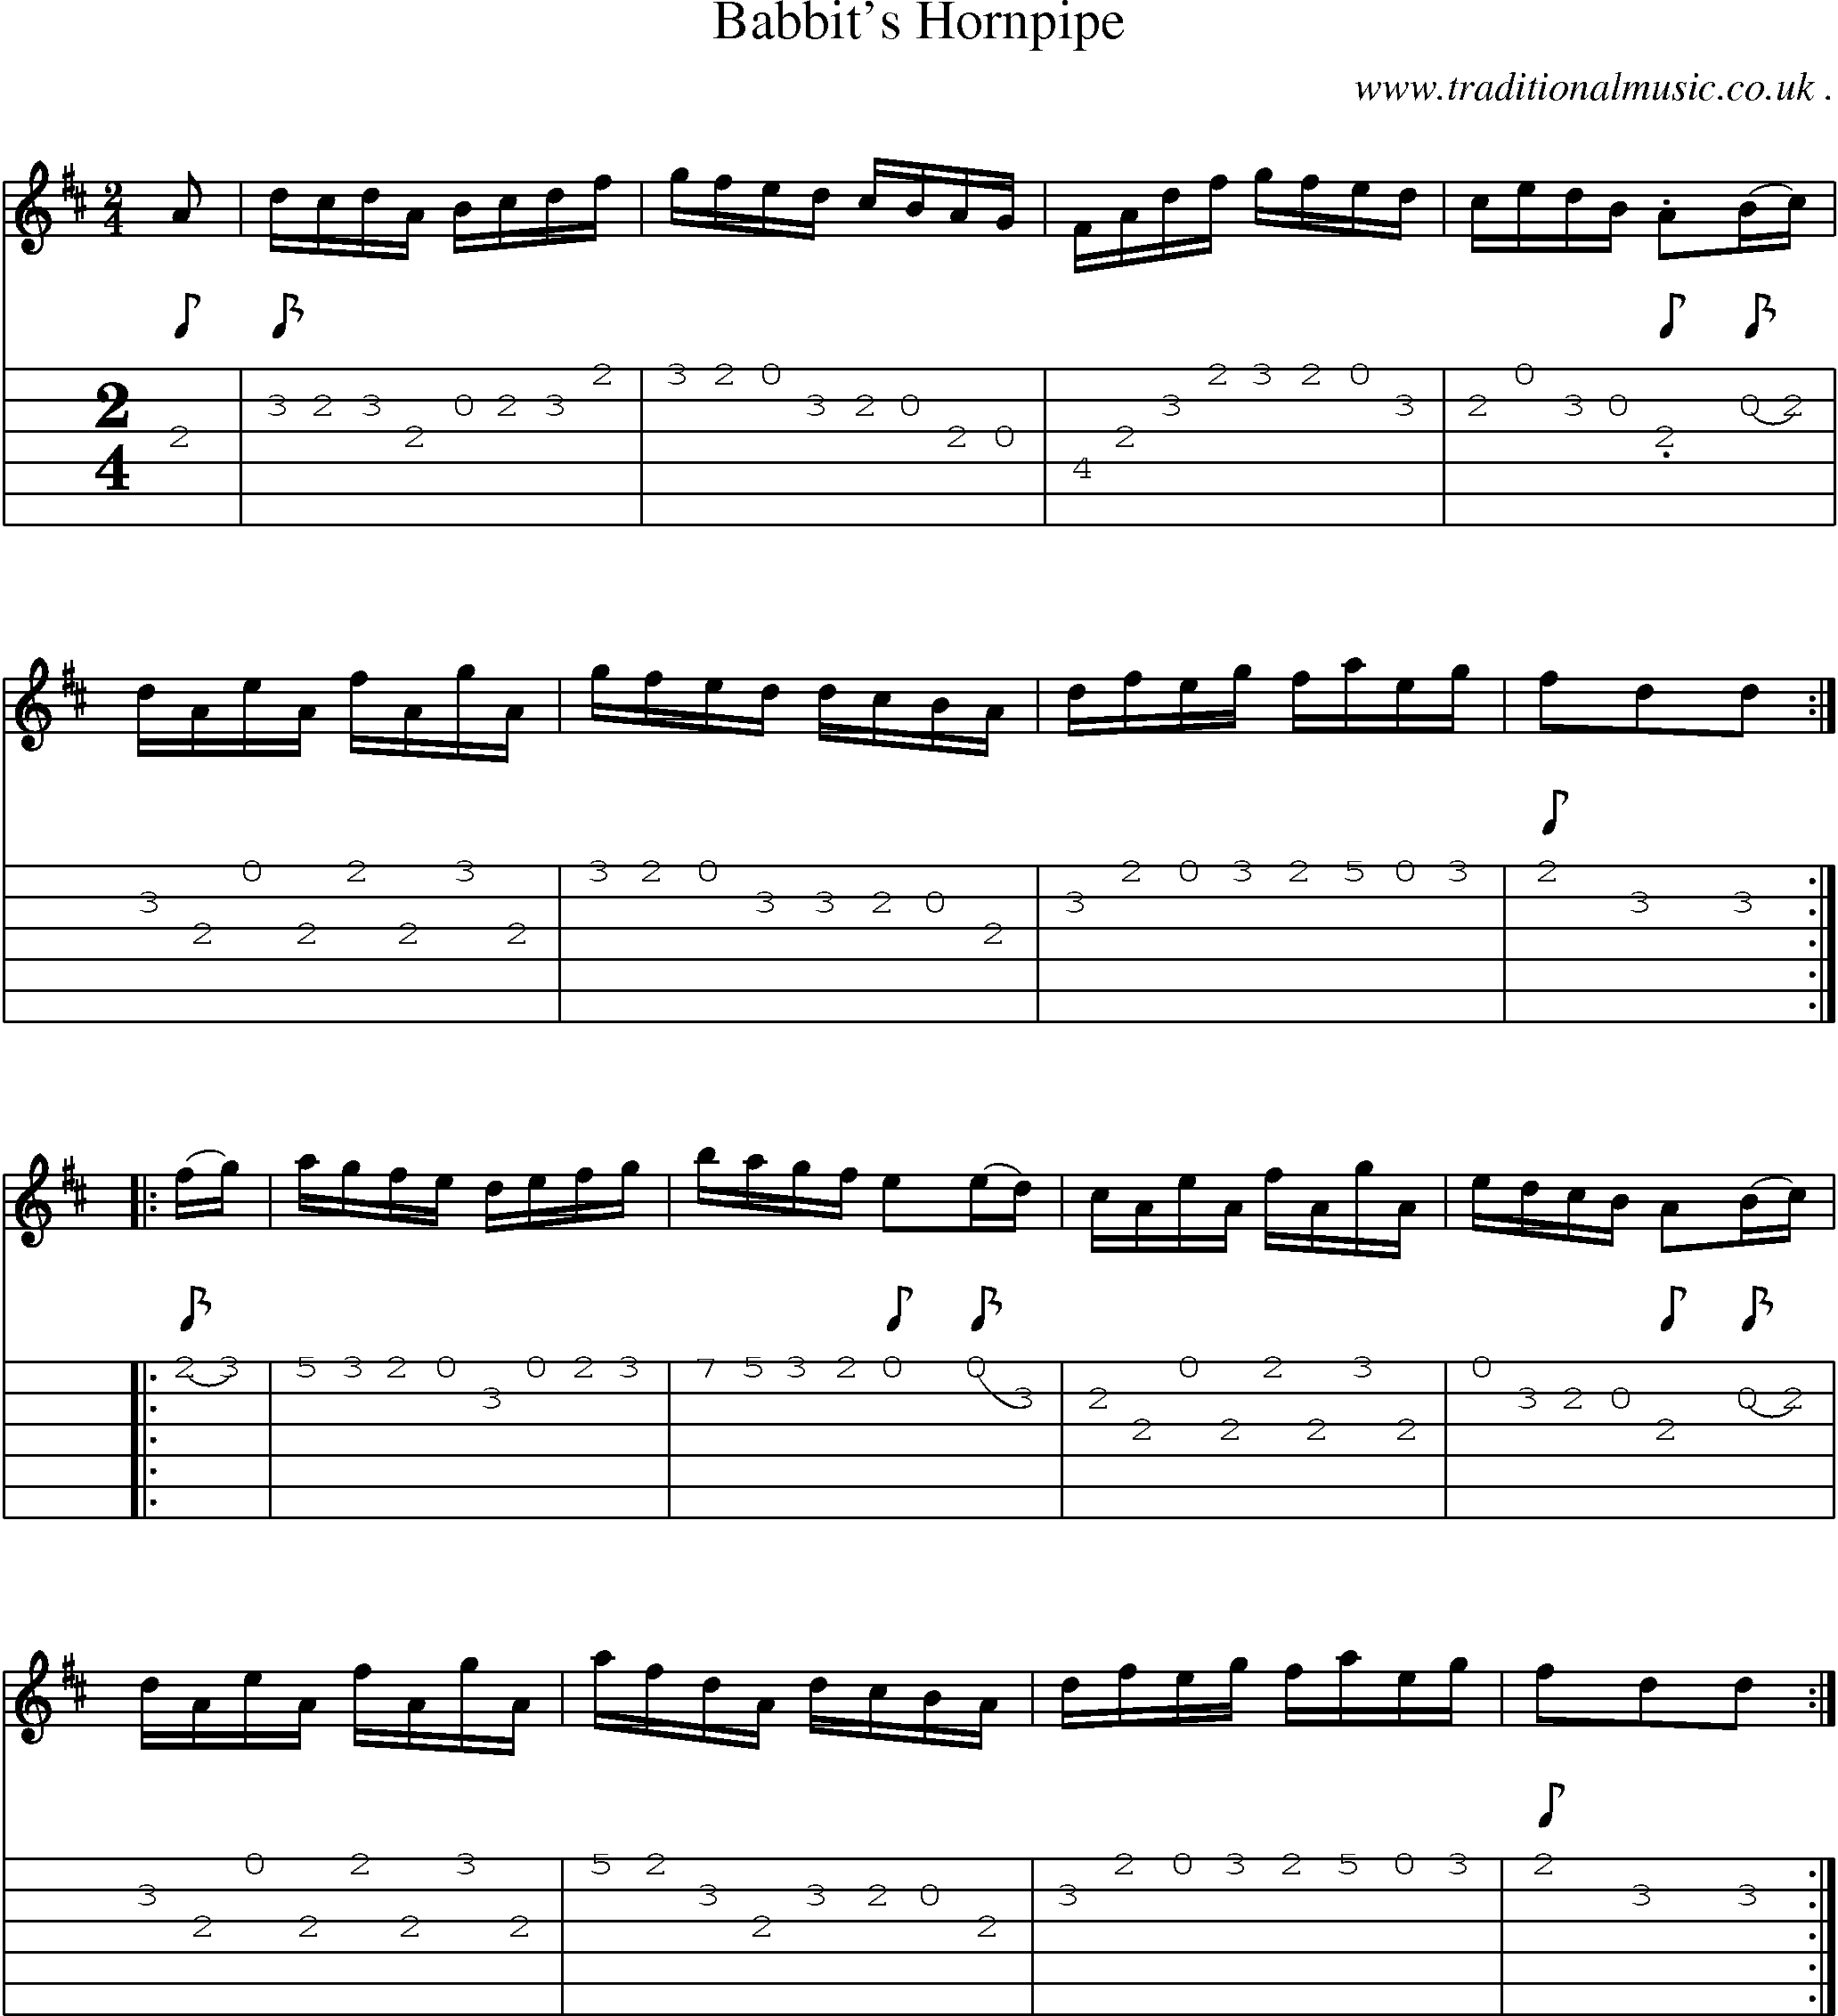 Sheet-Music and Guitar Tabs for Babbits Hornpipe